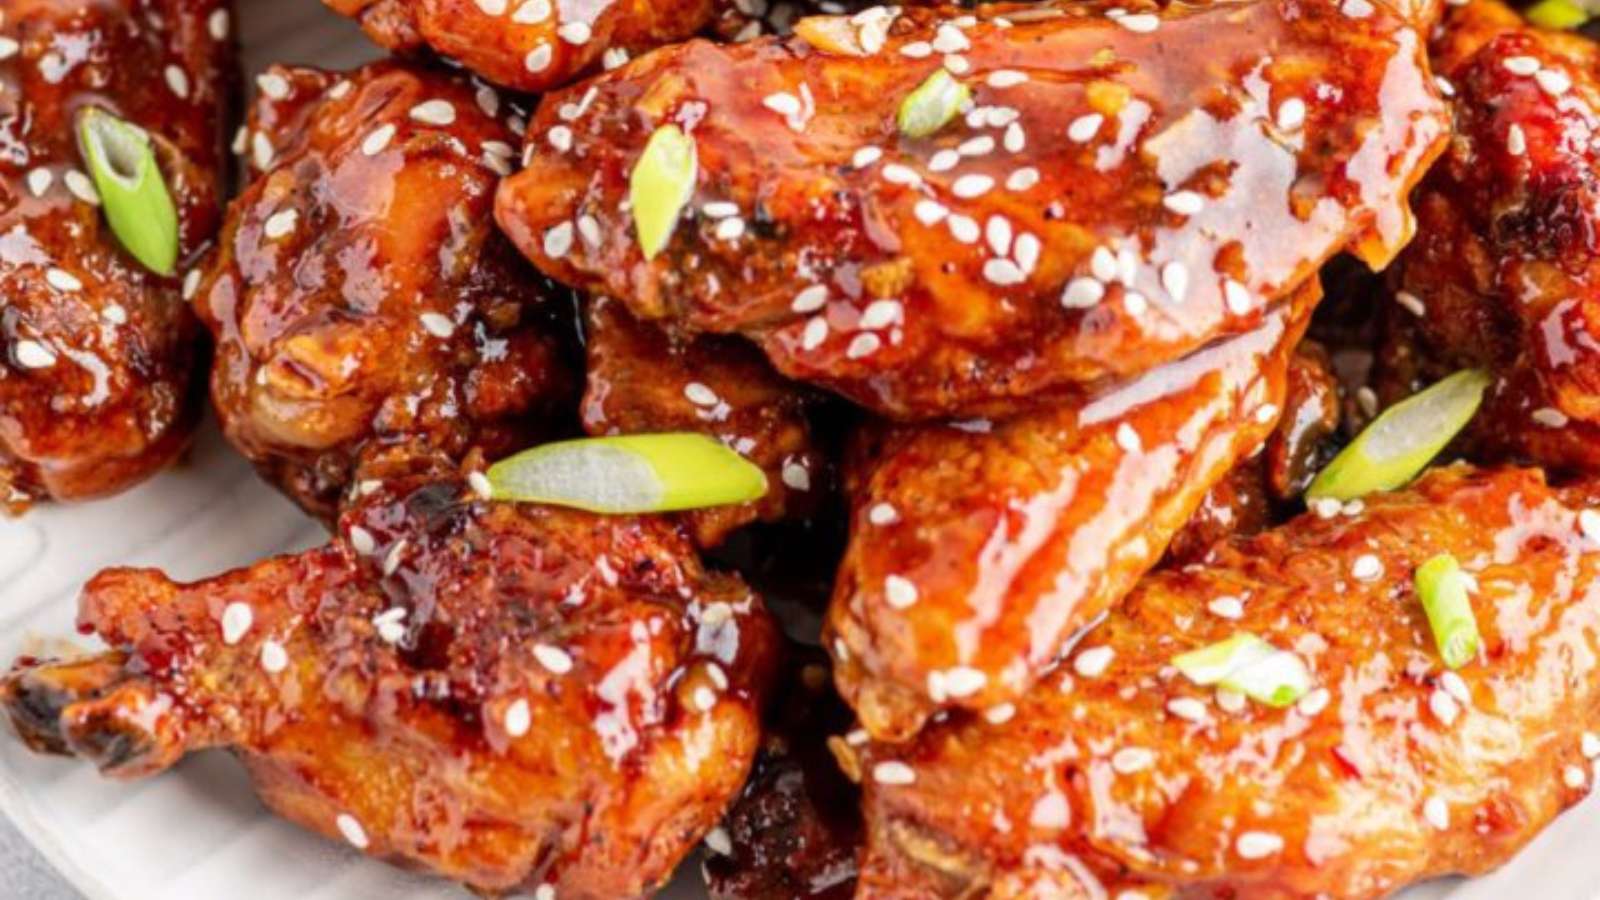 Sweet Chili chicken wings on a plate with sesame seeds.